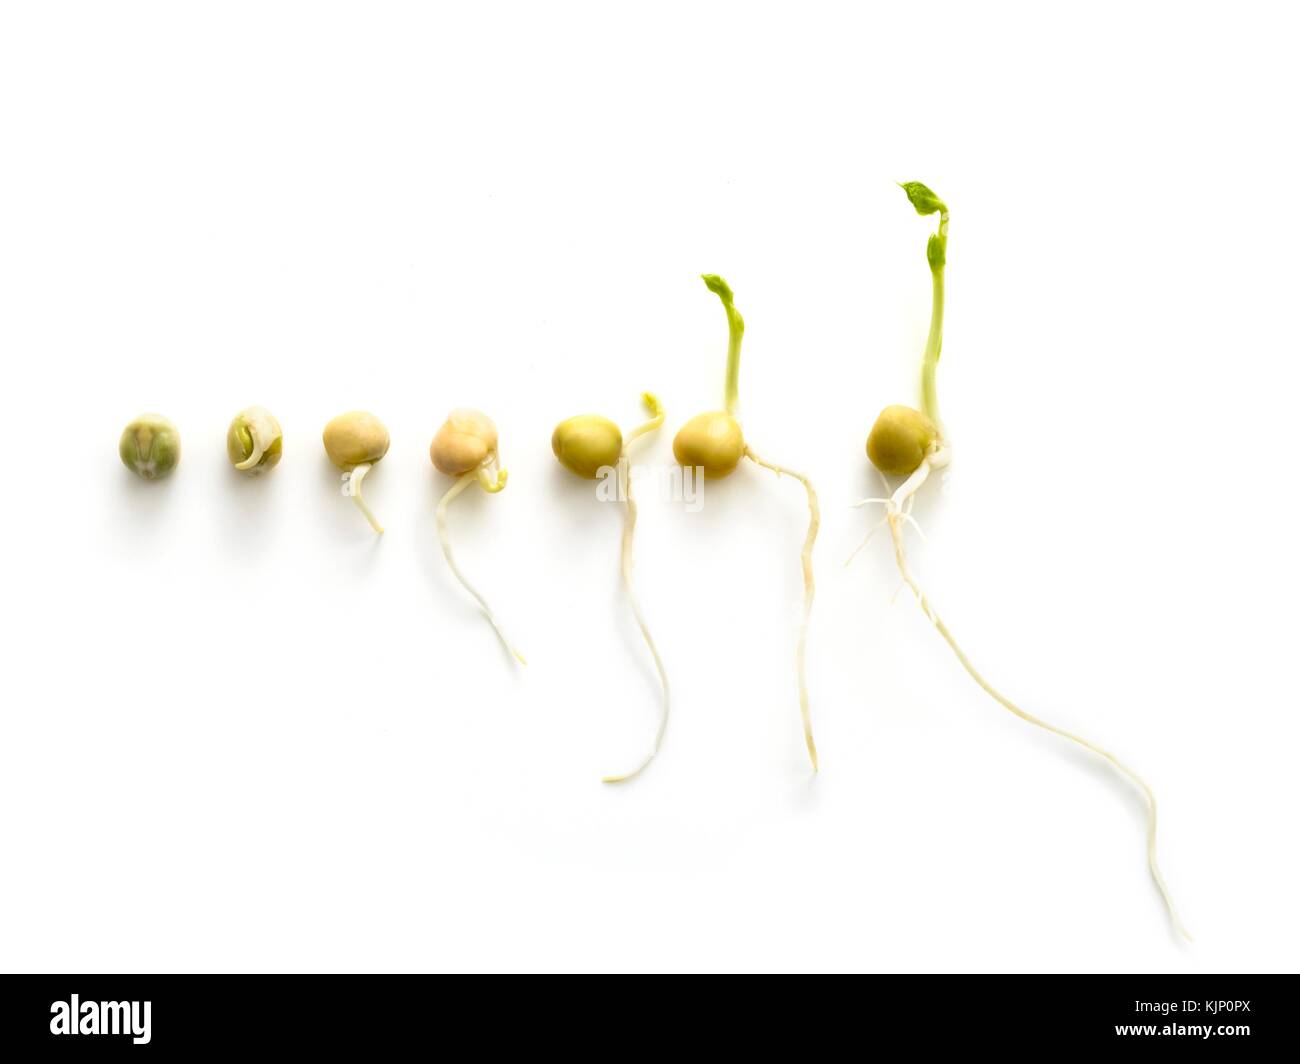 The seven day growth cycle of a sprouting pea. Stock Photo